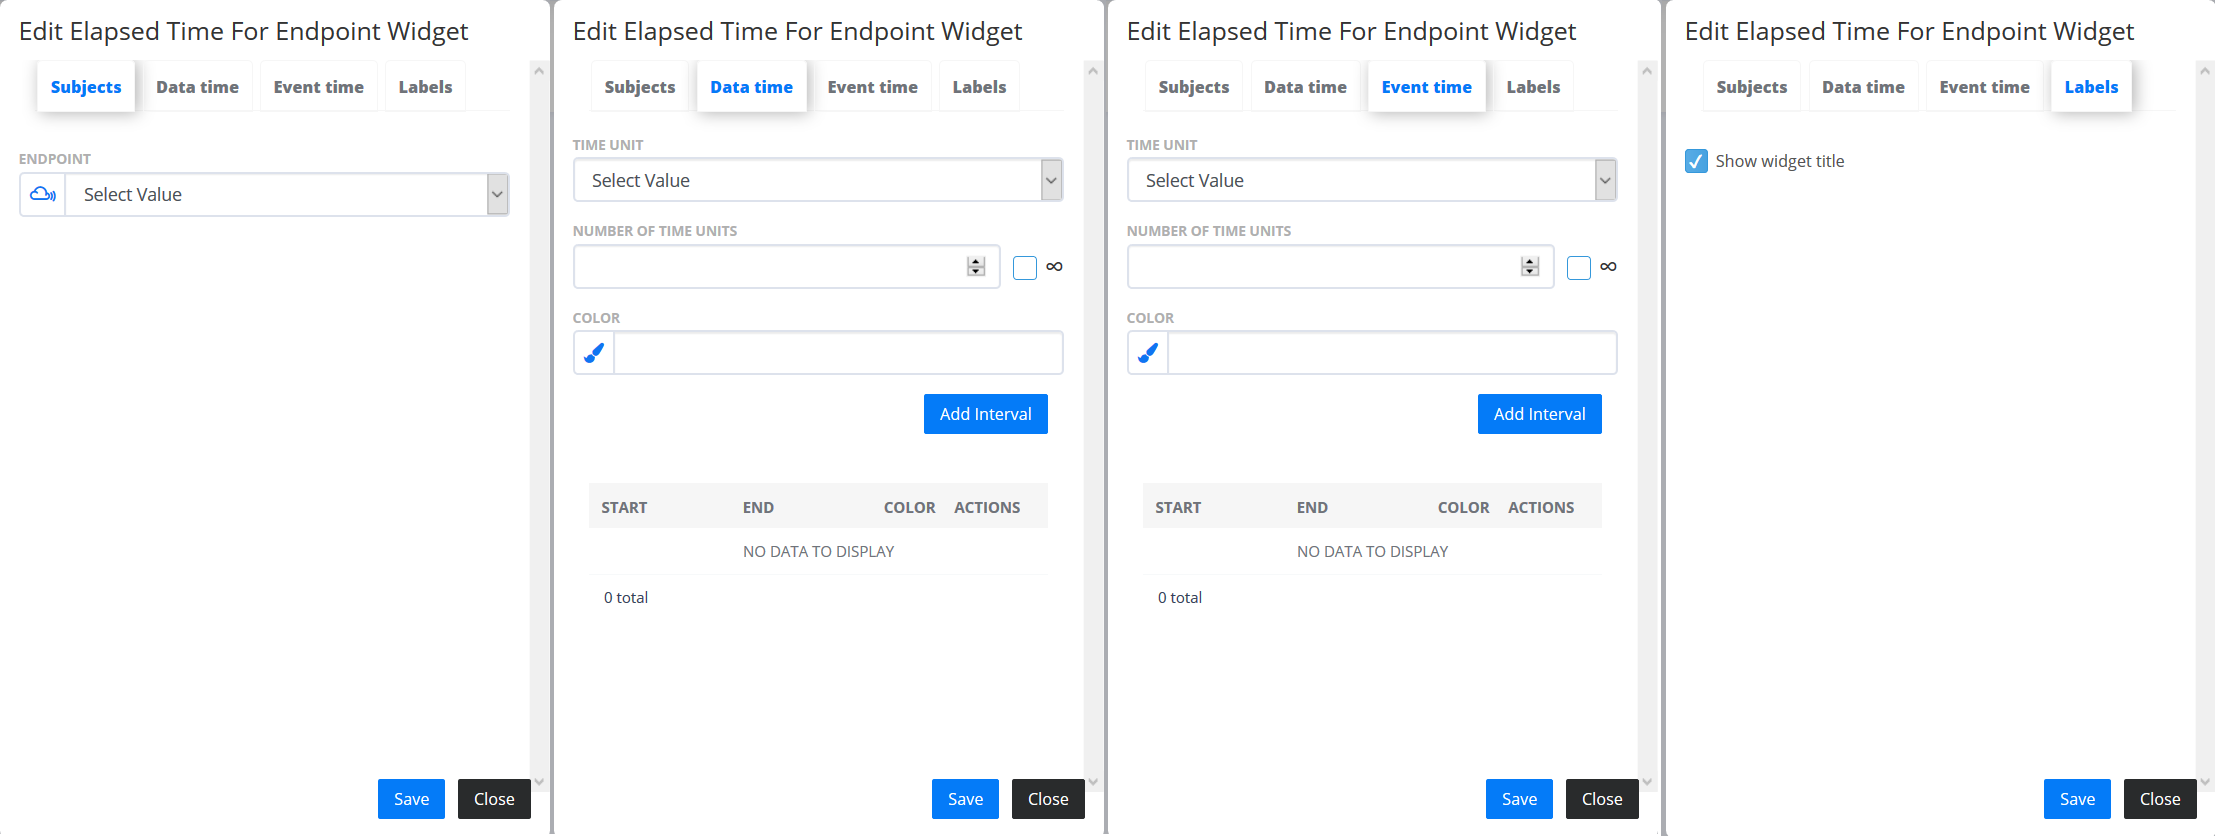 Elapsed time for endpoint widget menu